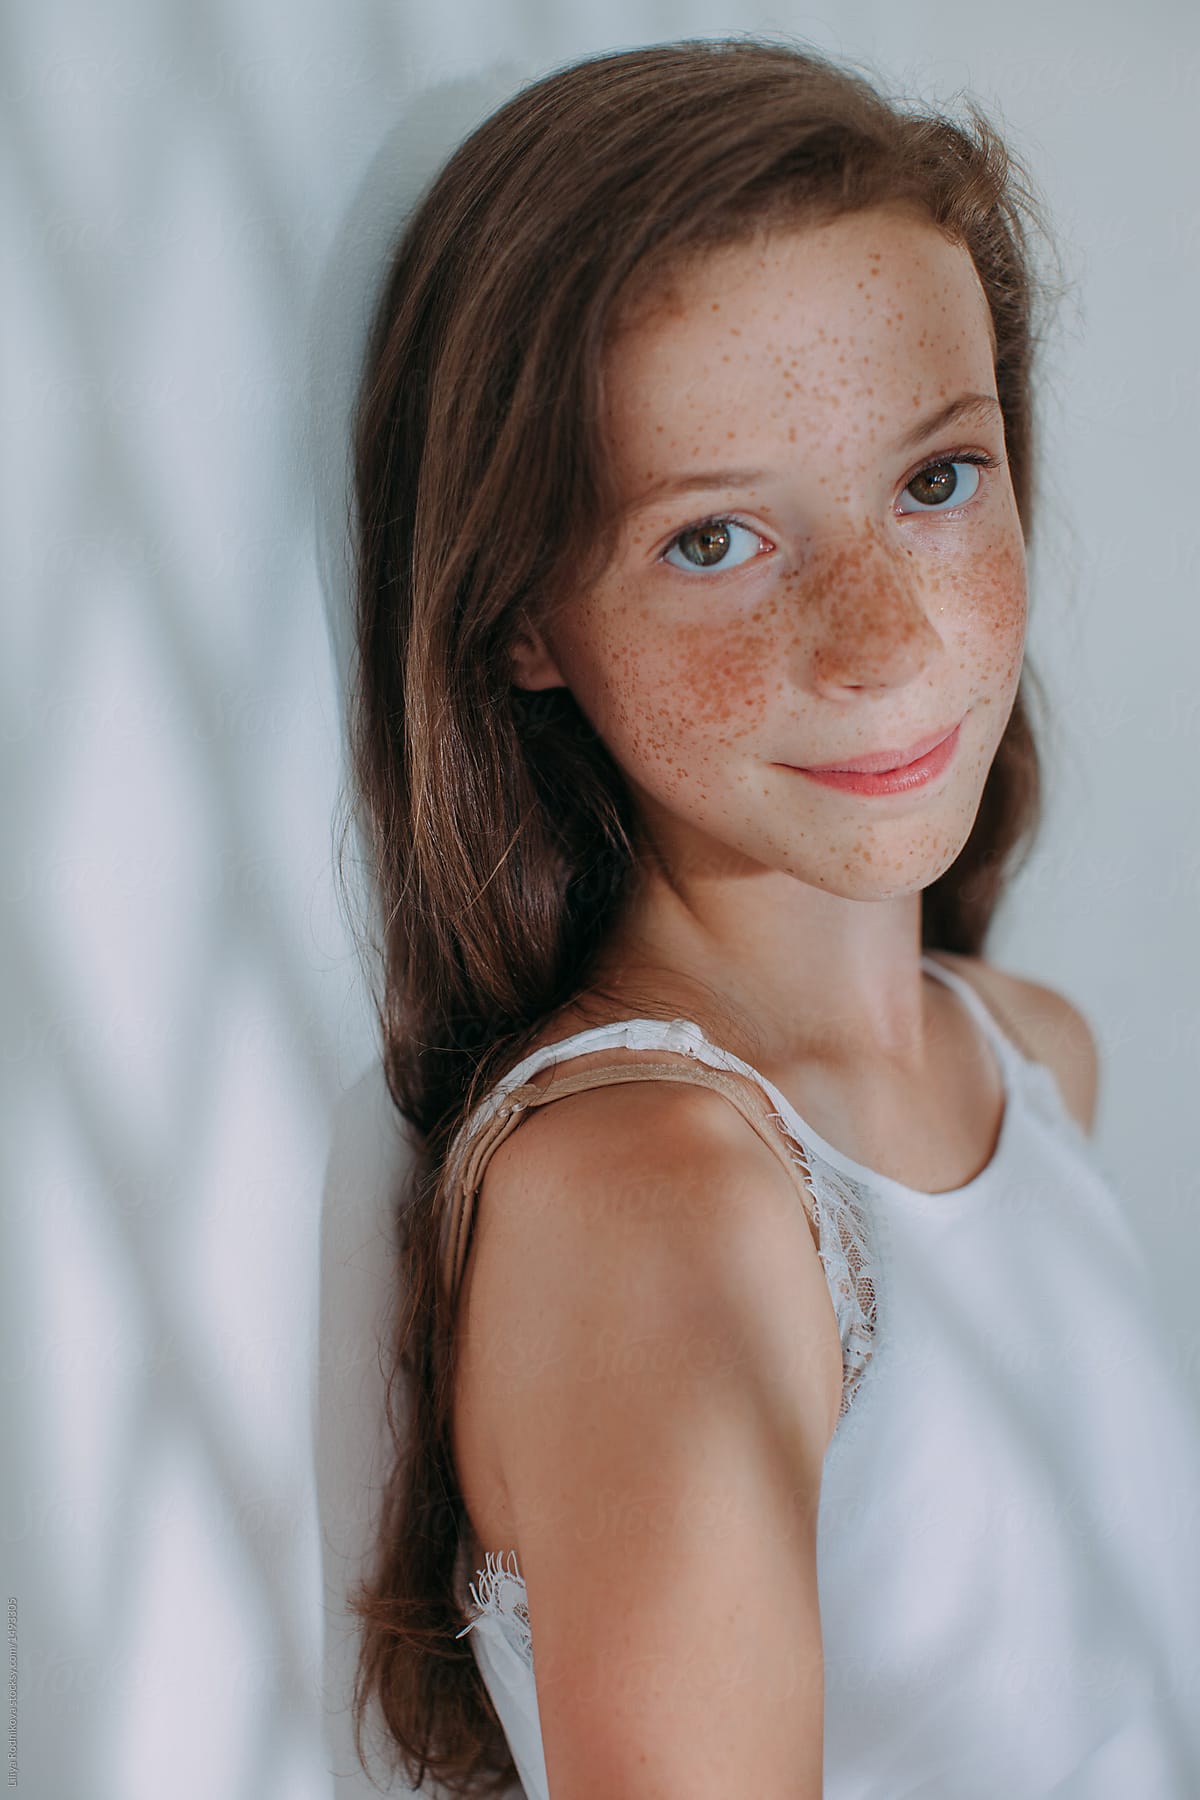 Face Of A Beautiful Girl With Freckles Close-Up Download 